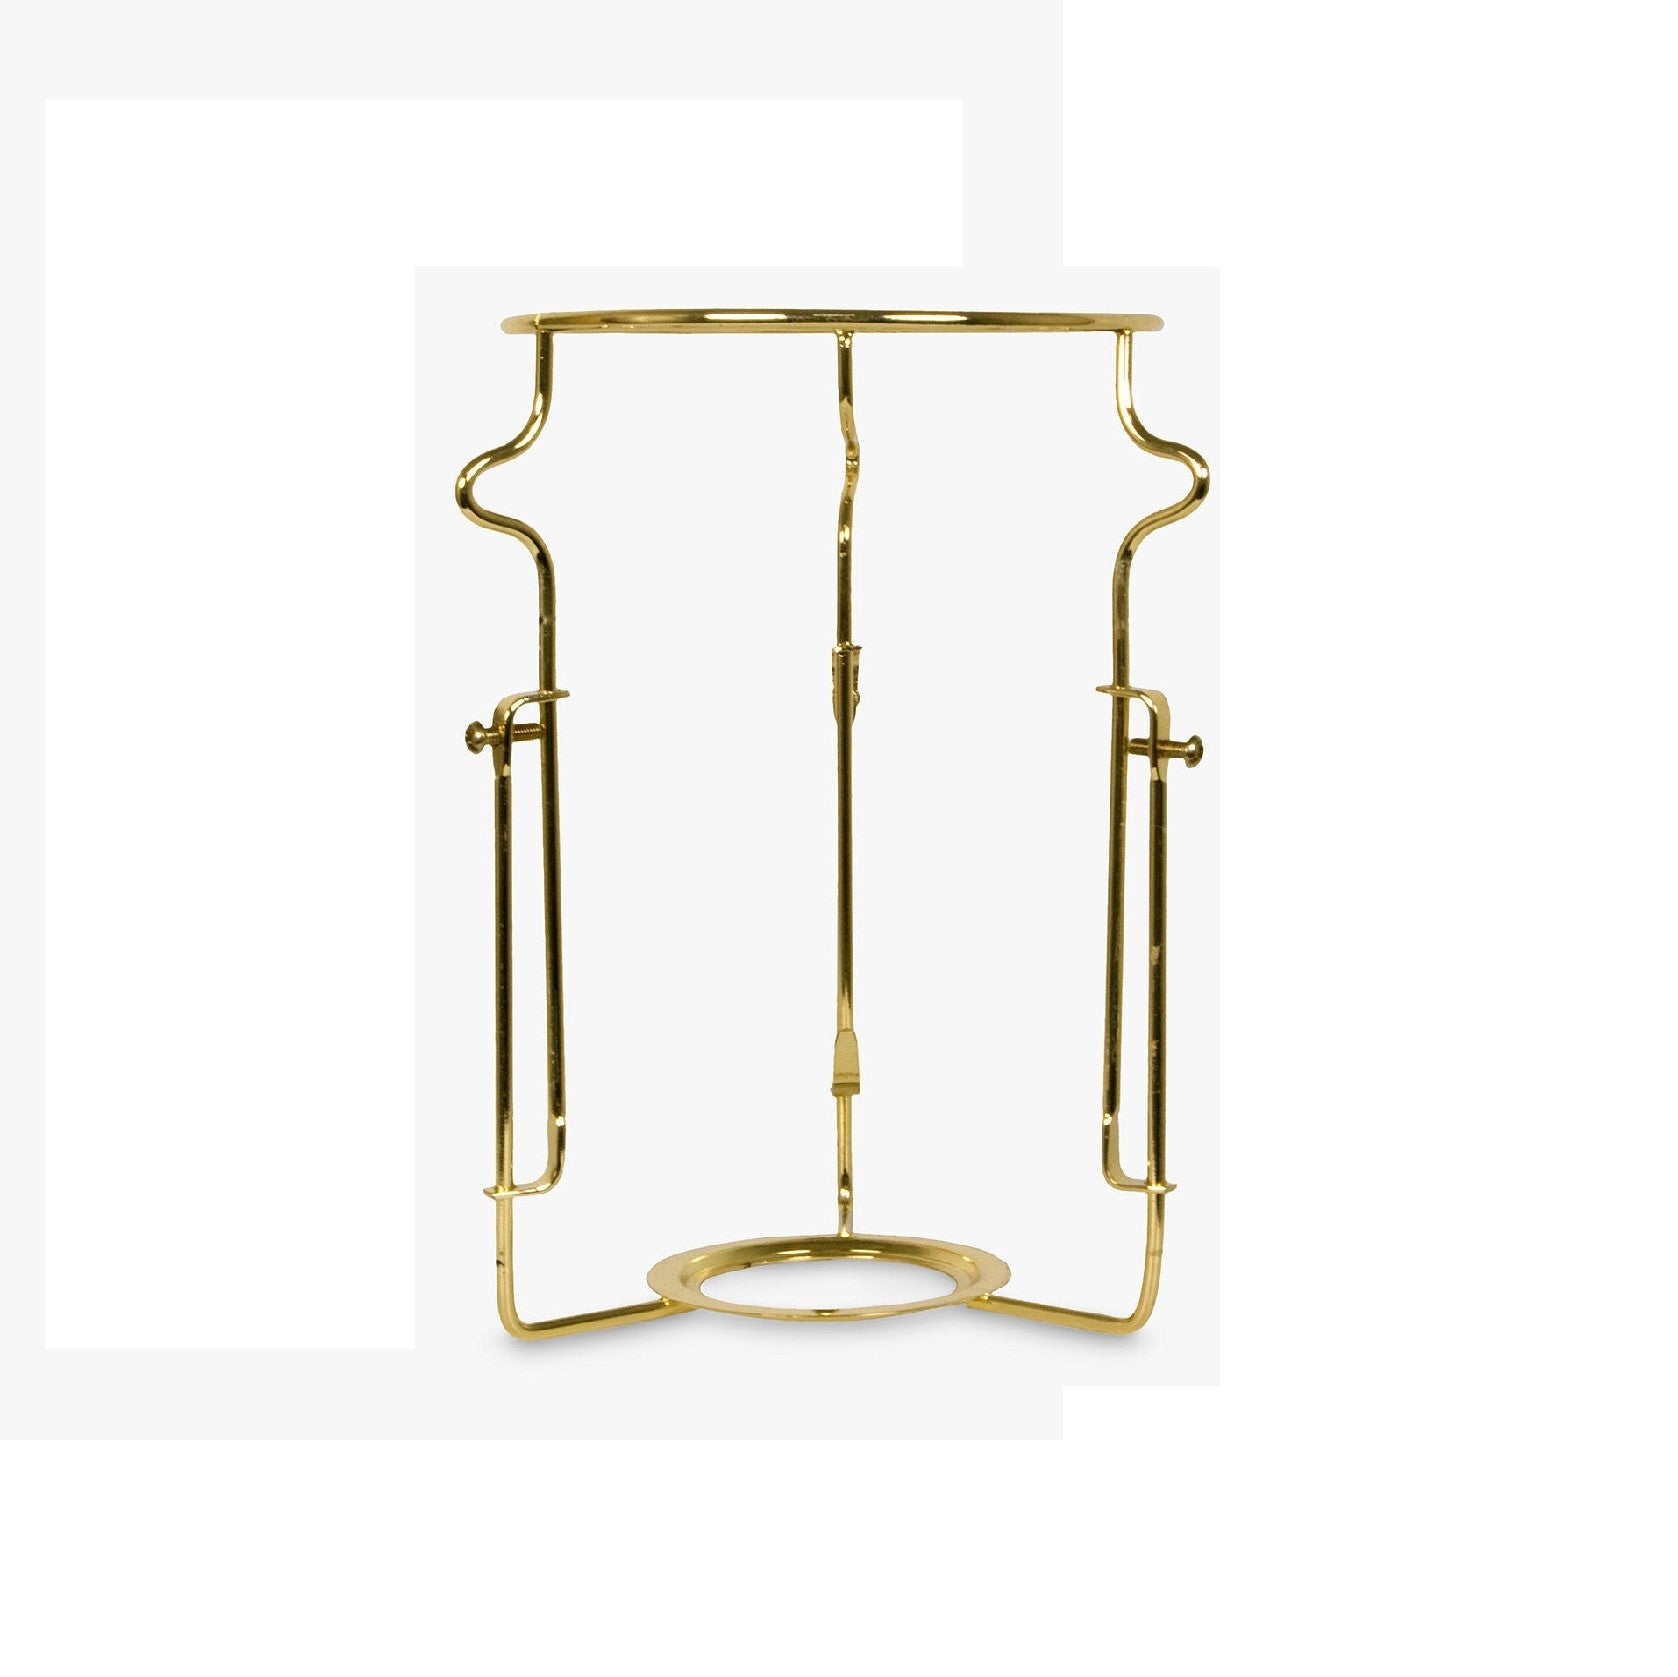 Additional Brass Lampshade Carrier